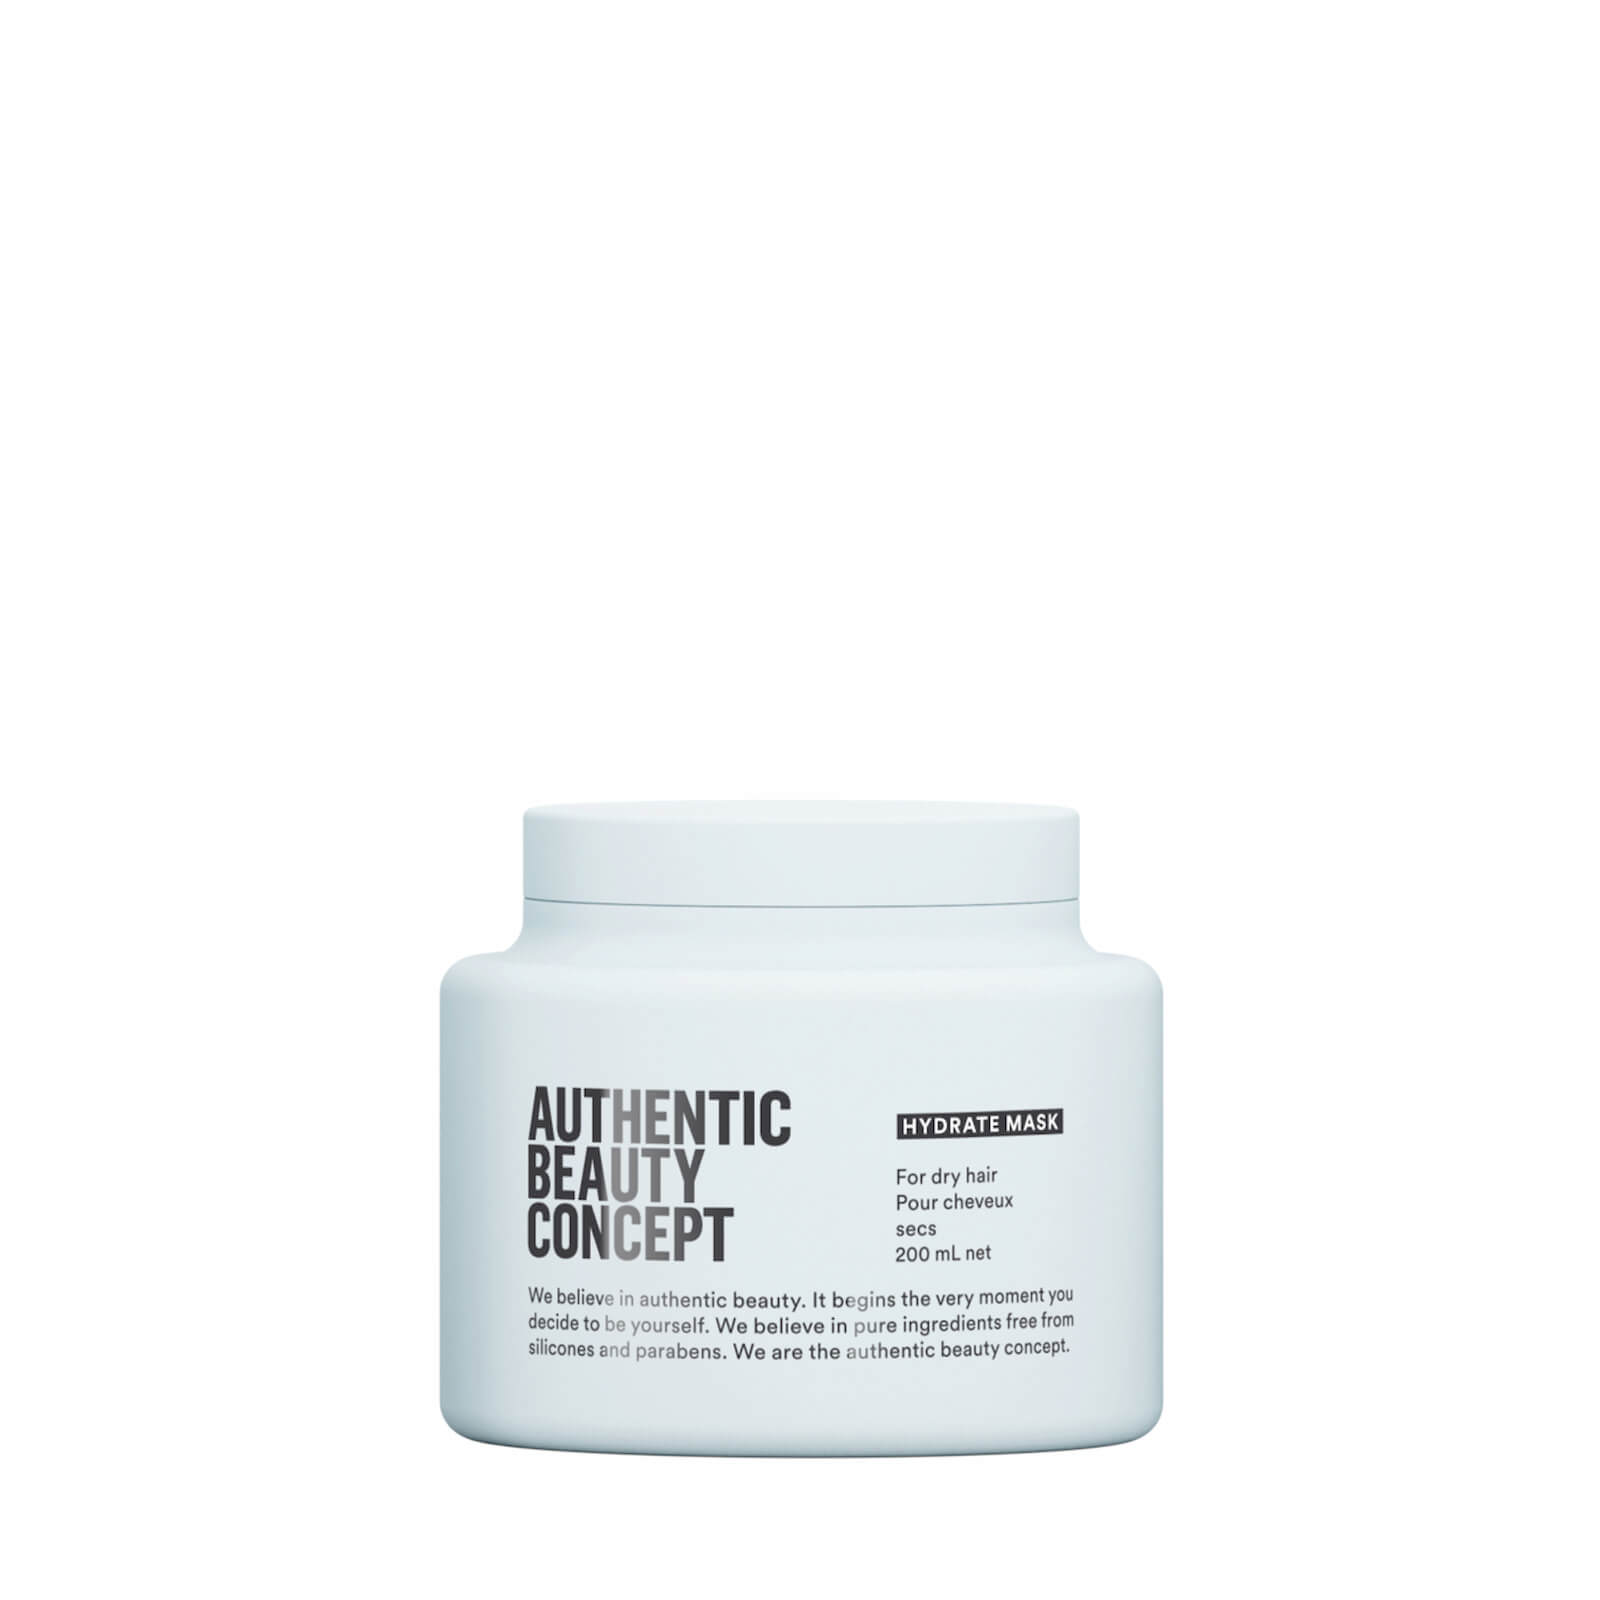 Authentic Beauty Concept Hydrate Mask 200ml BUY ONLINE North Laine Hair Co